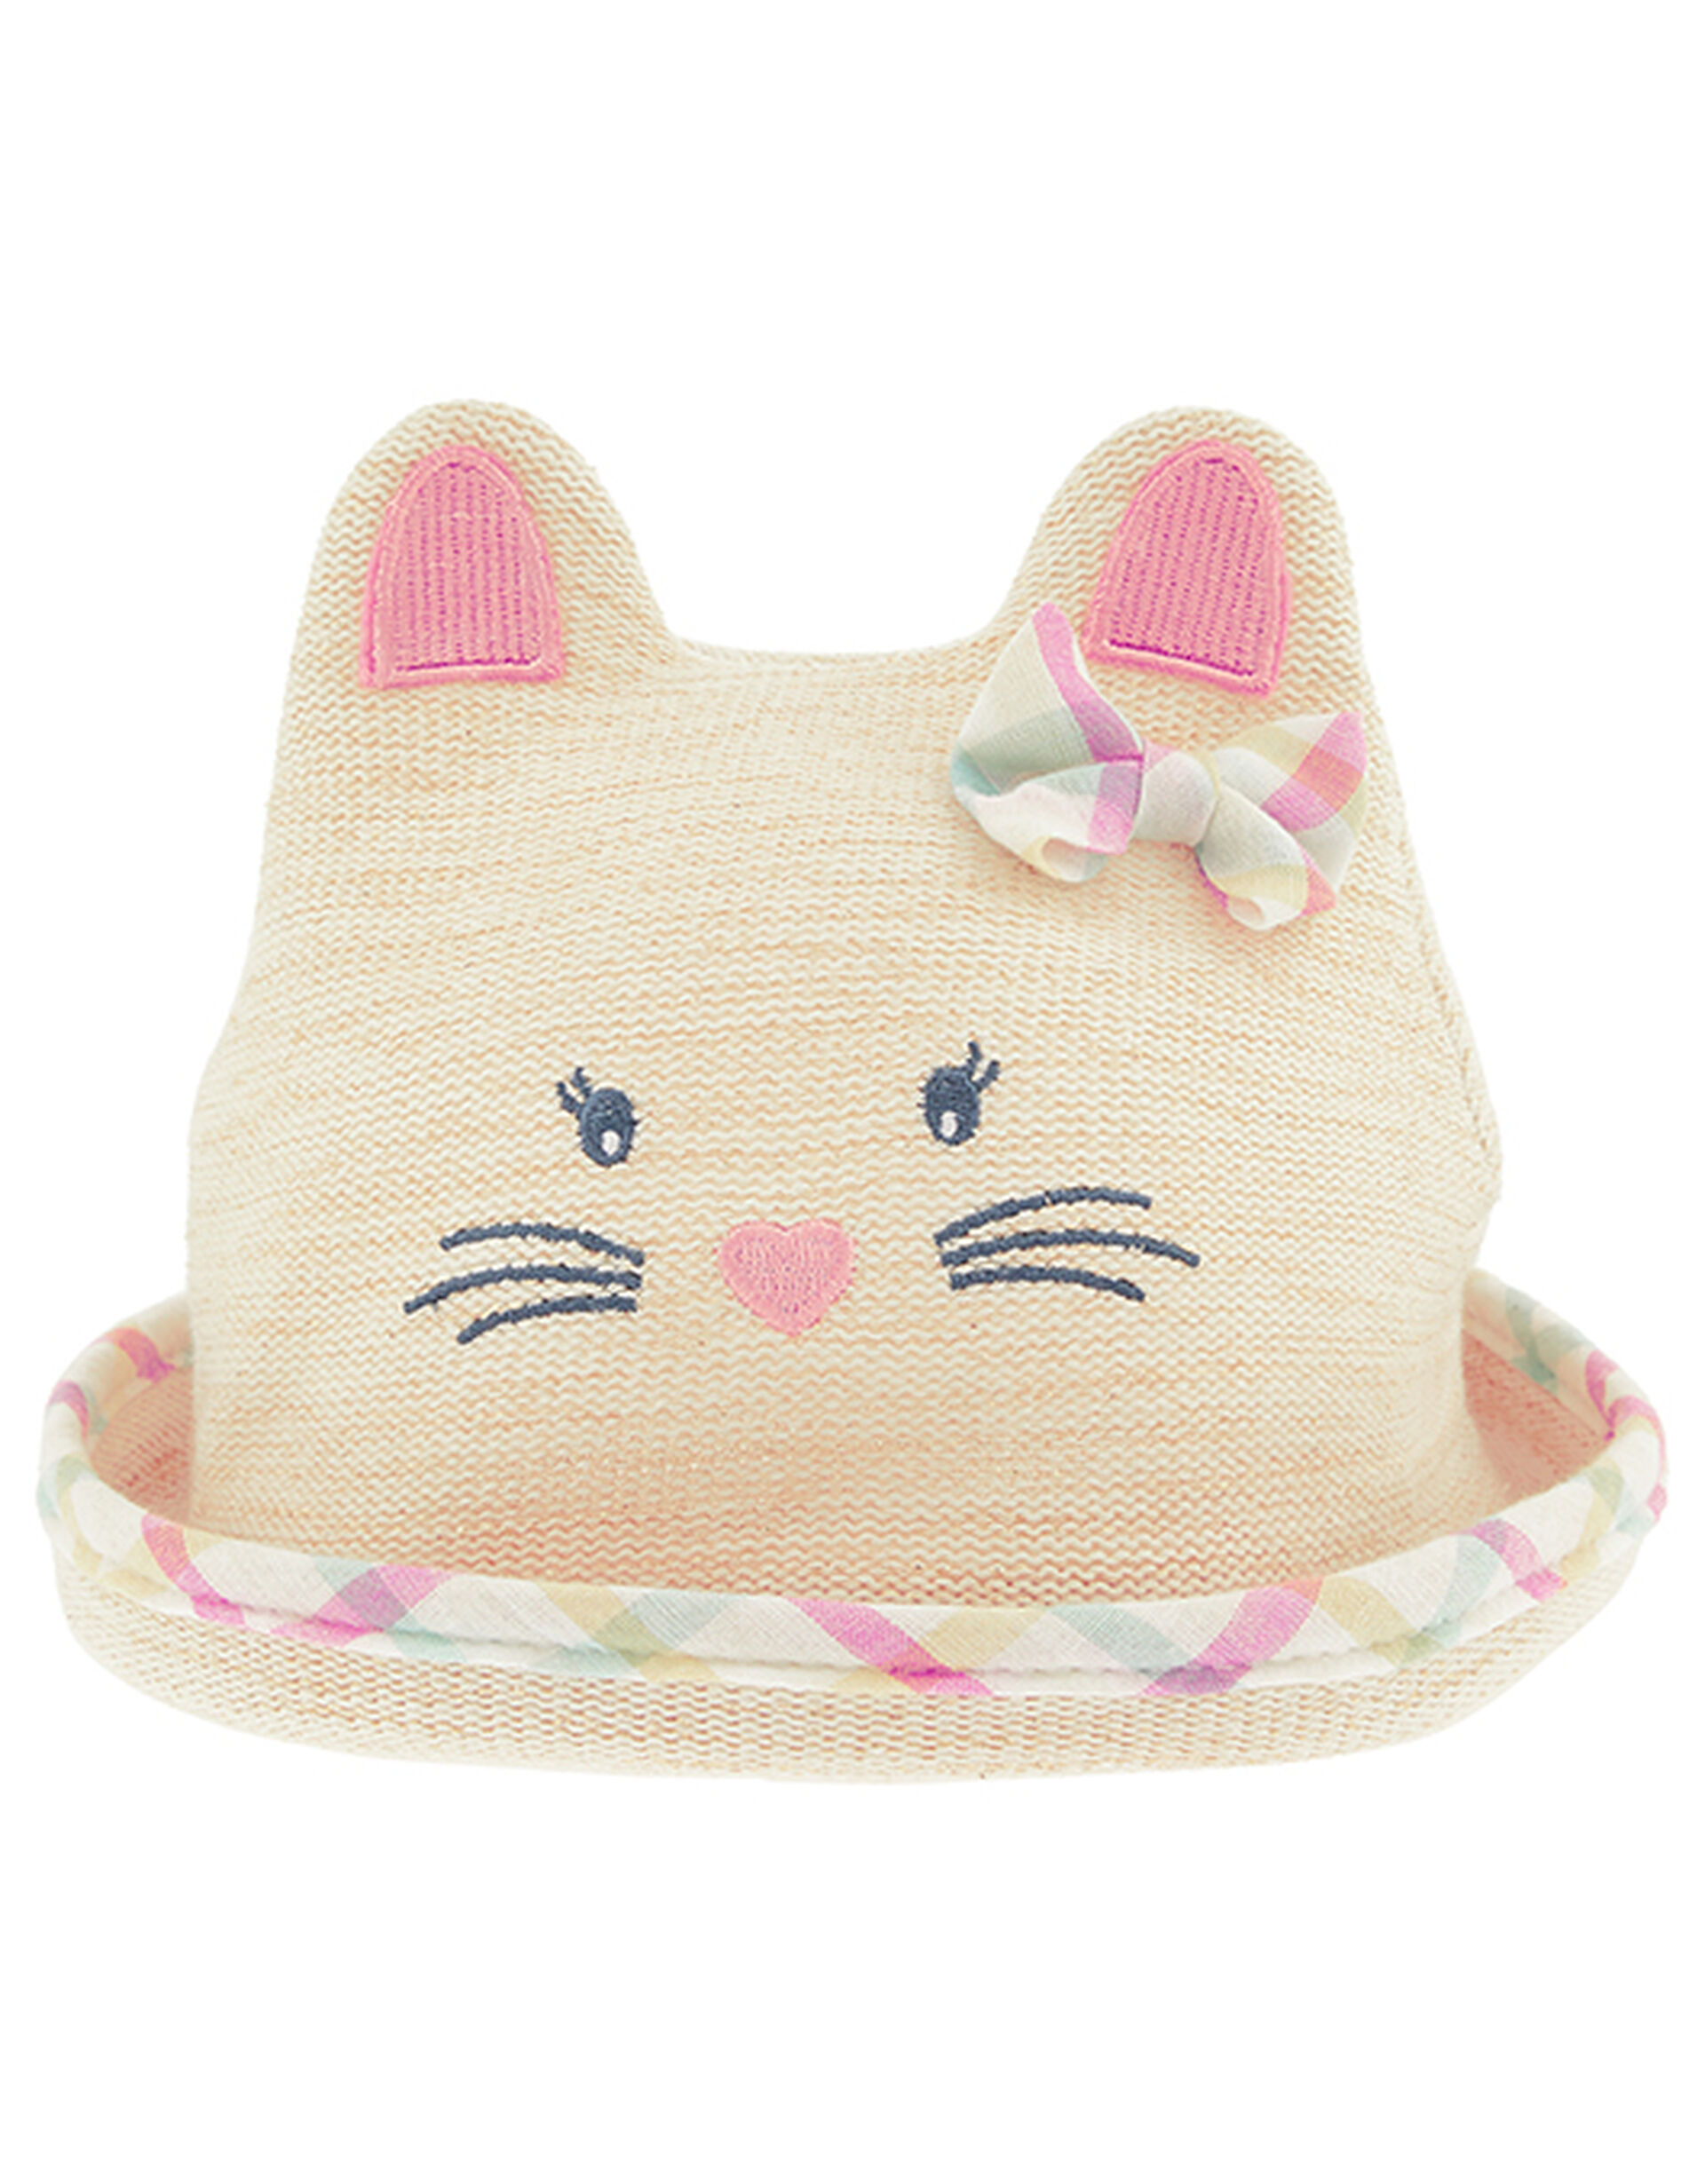 Baby Mollie Moo Bunny Bowler Hat in Organic Cotton, Natural (NATURAL), large